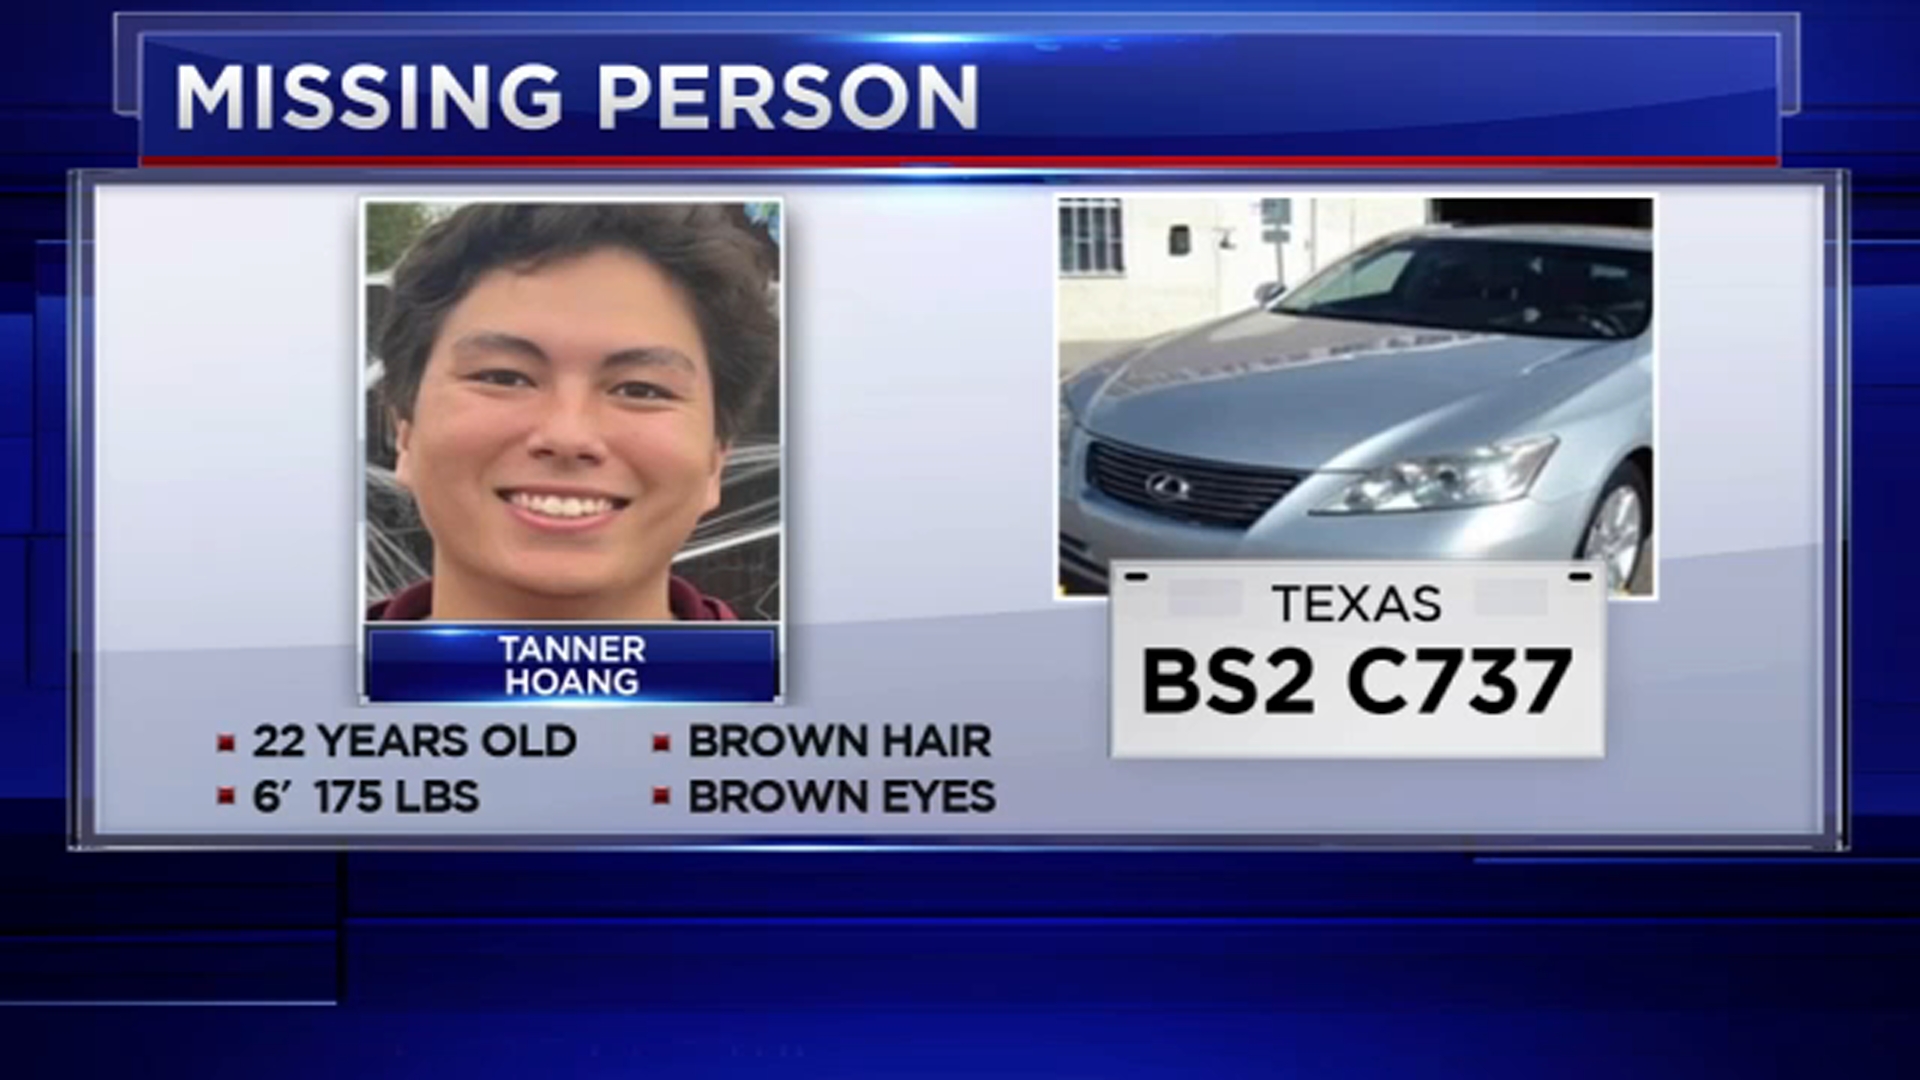 Texas A&M Student missing